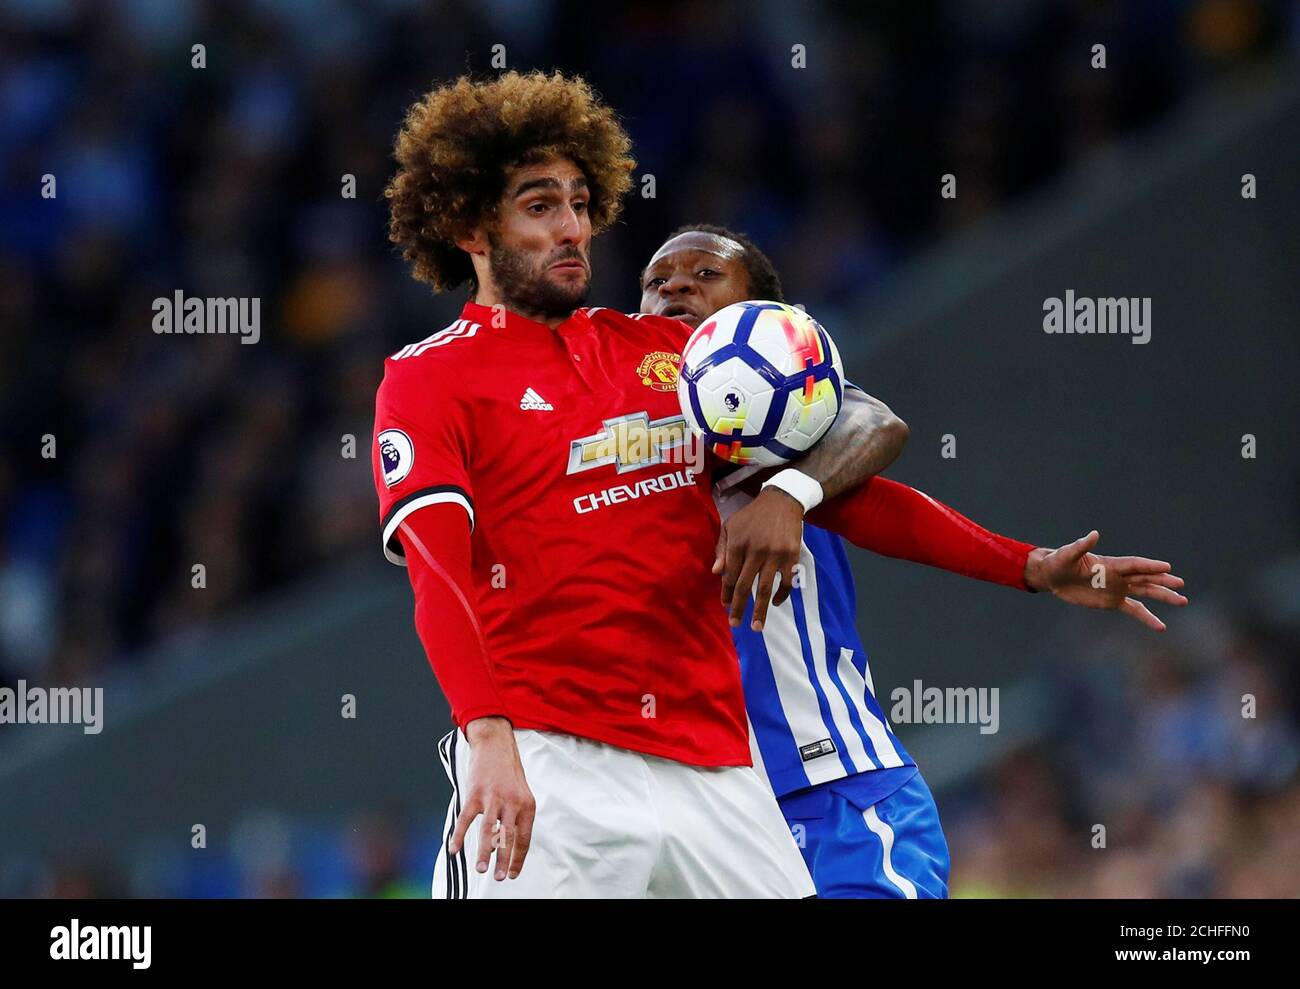 Soccer Football - Premier League - Brighton & Hove Albion v Manchester United - The American Express Community Stadium, Brighton, Britain - May 4, 2018   Manchester United's Marouane Fellaini in action with Brighton's Gaetan Bong   REUTERS/Eddie Keogh    EDITORIAL USE ONLY. No use with unauthorized audio, video, data, fixture lists, club/league logos or 'live' services. Online in-match use limited to 75 images, no video emulation. No use in betting, games or single club/league/player publications.  Please contact your account representative for further details. Stock Photo